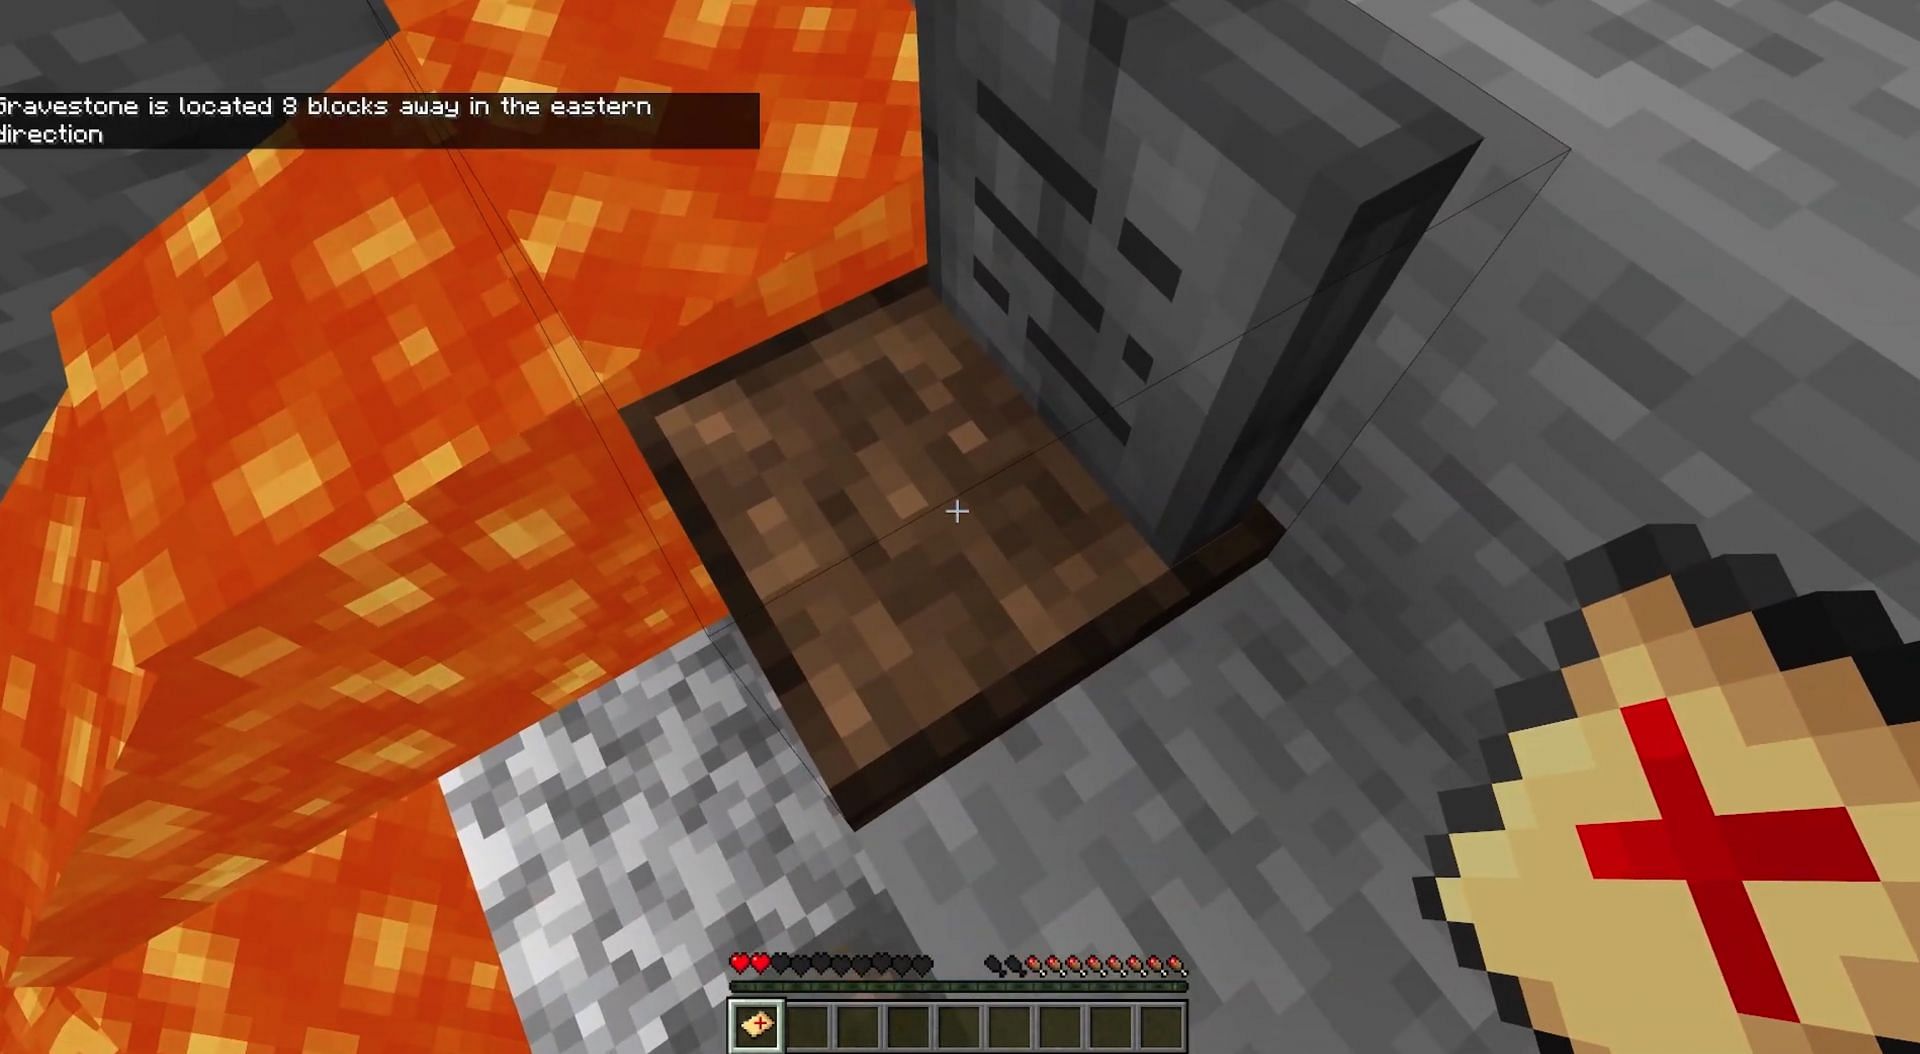 Accessing the gravestone in the game (screenshot from YouTube/Bedrock Princess)